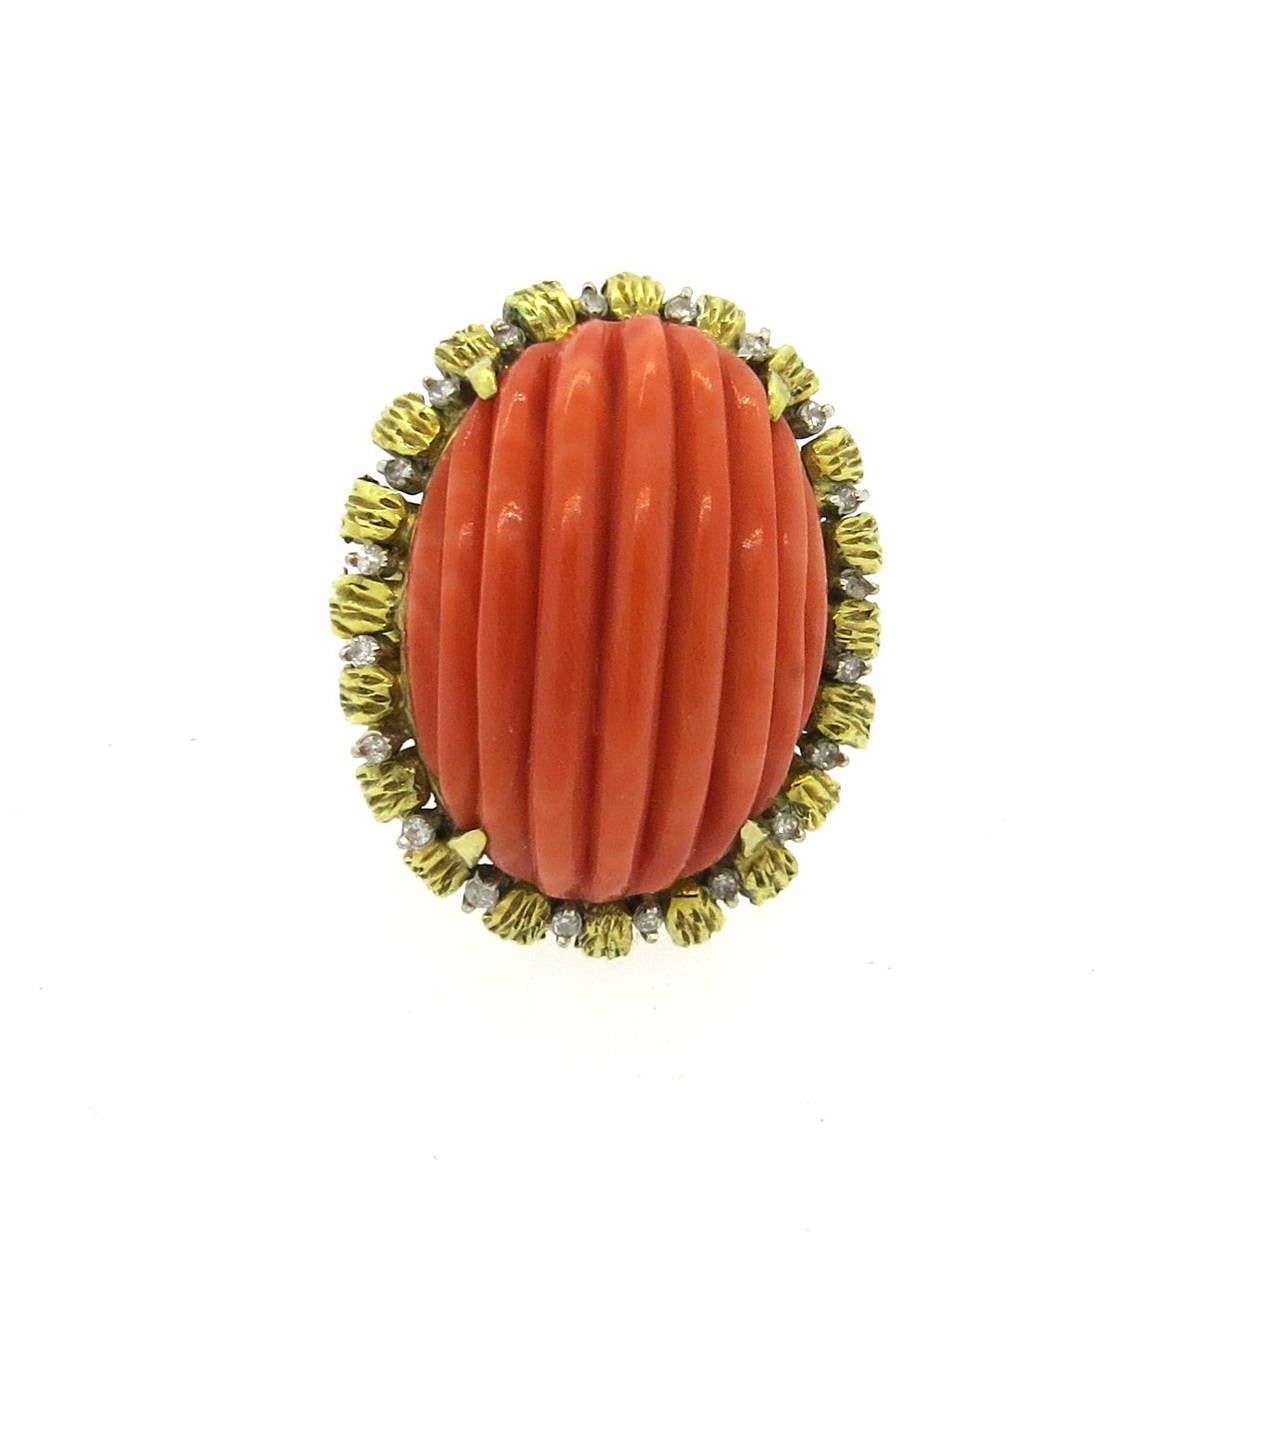 Vintage 18k gold ring, set with 25mm x 17mm carved coral in the center, surrounded with diamonds. Ring is a size 7 1/2, ring top is 28mm x 23mm. Weight of the piece - 20.2 grams